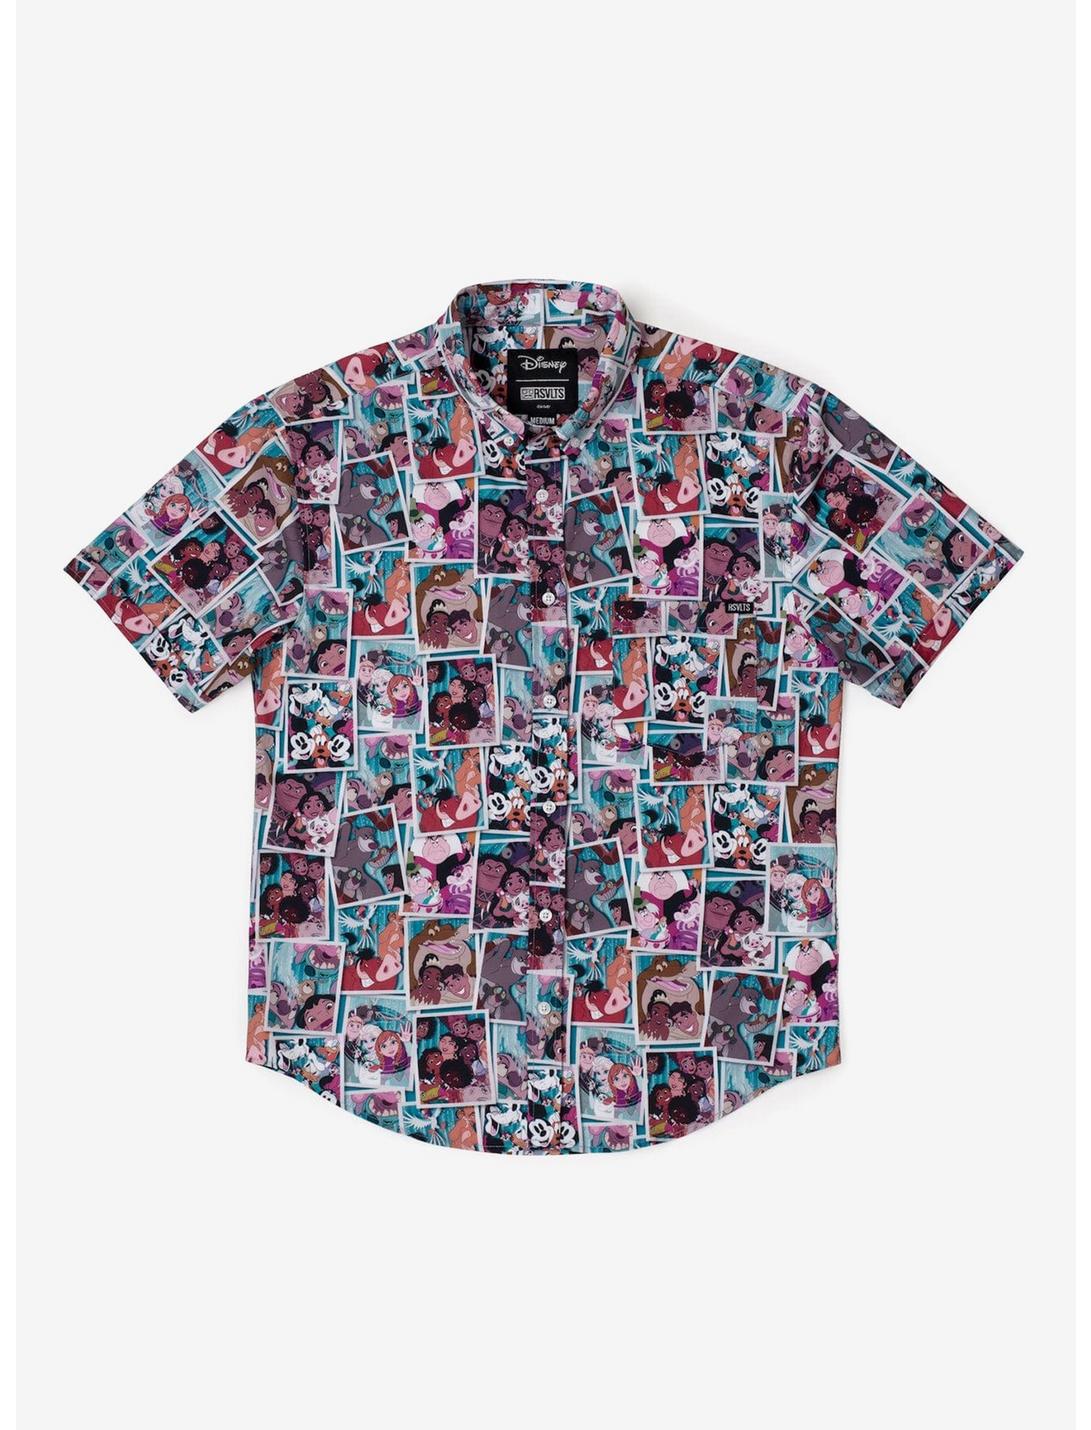 RSVLTS x Disney100 "Say Cheeeese!" Button-Up Shirt, MULTI, hi-res